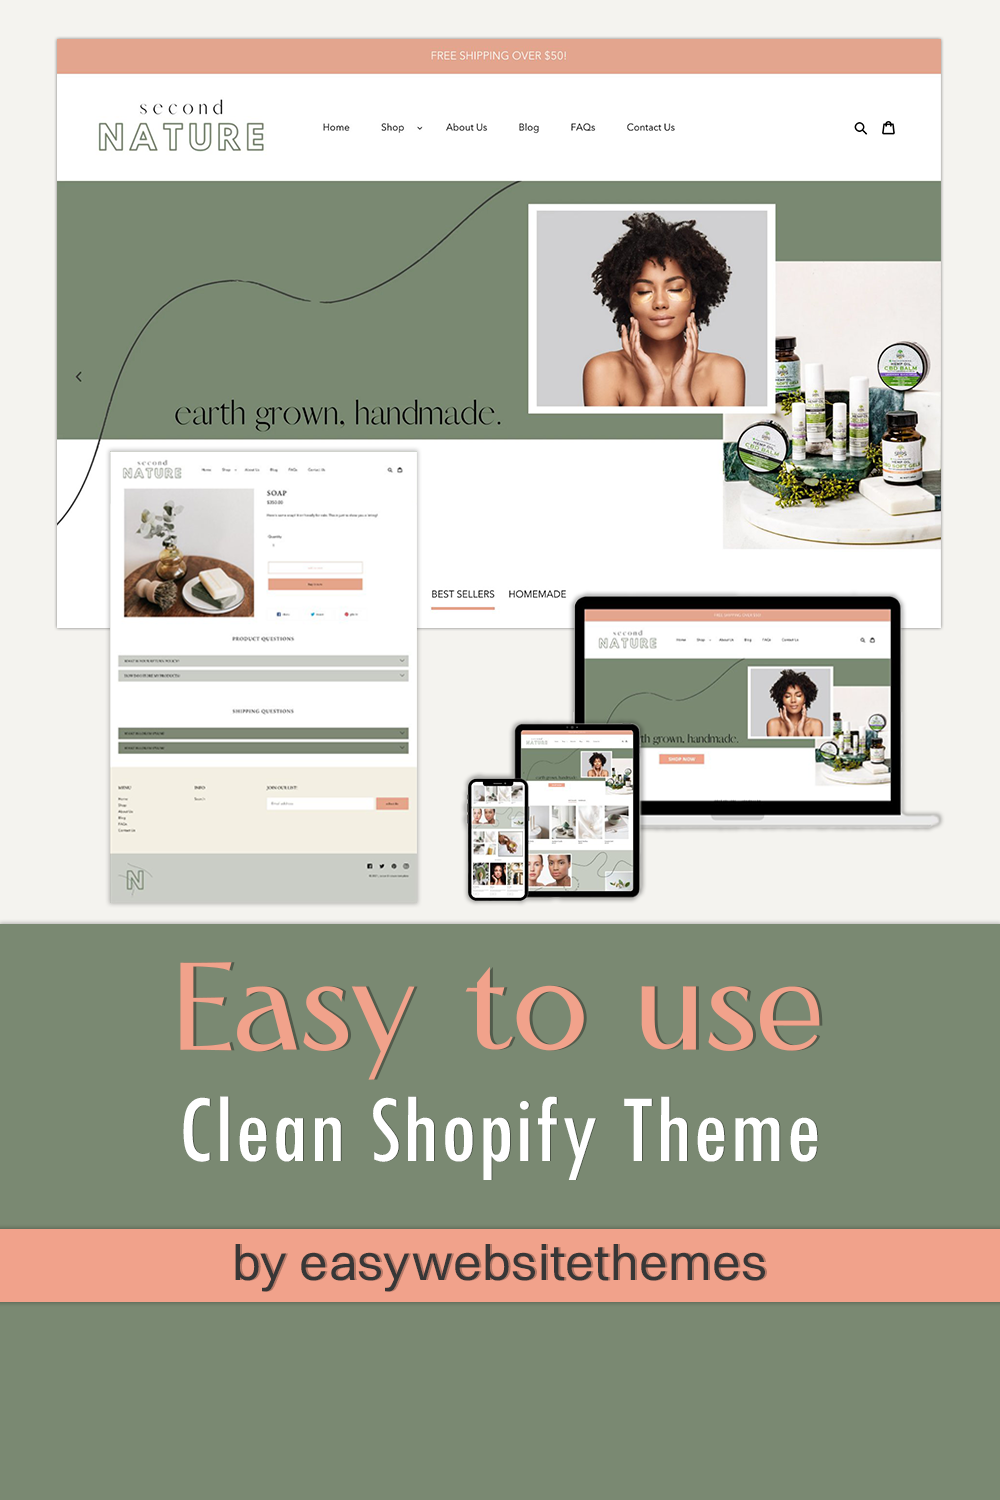 Clean shopify theme i easy to use images of pinterest.